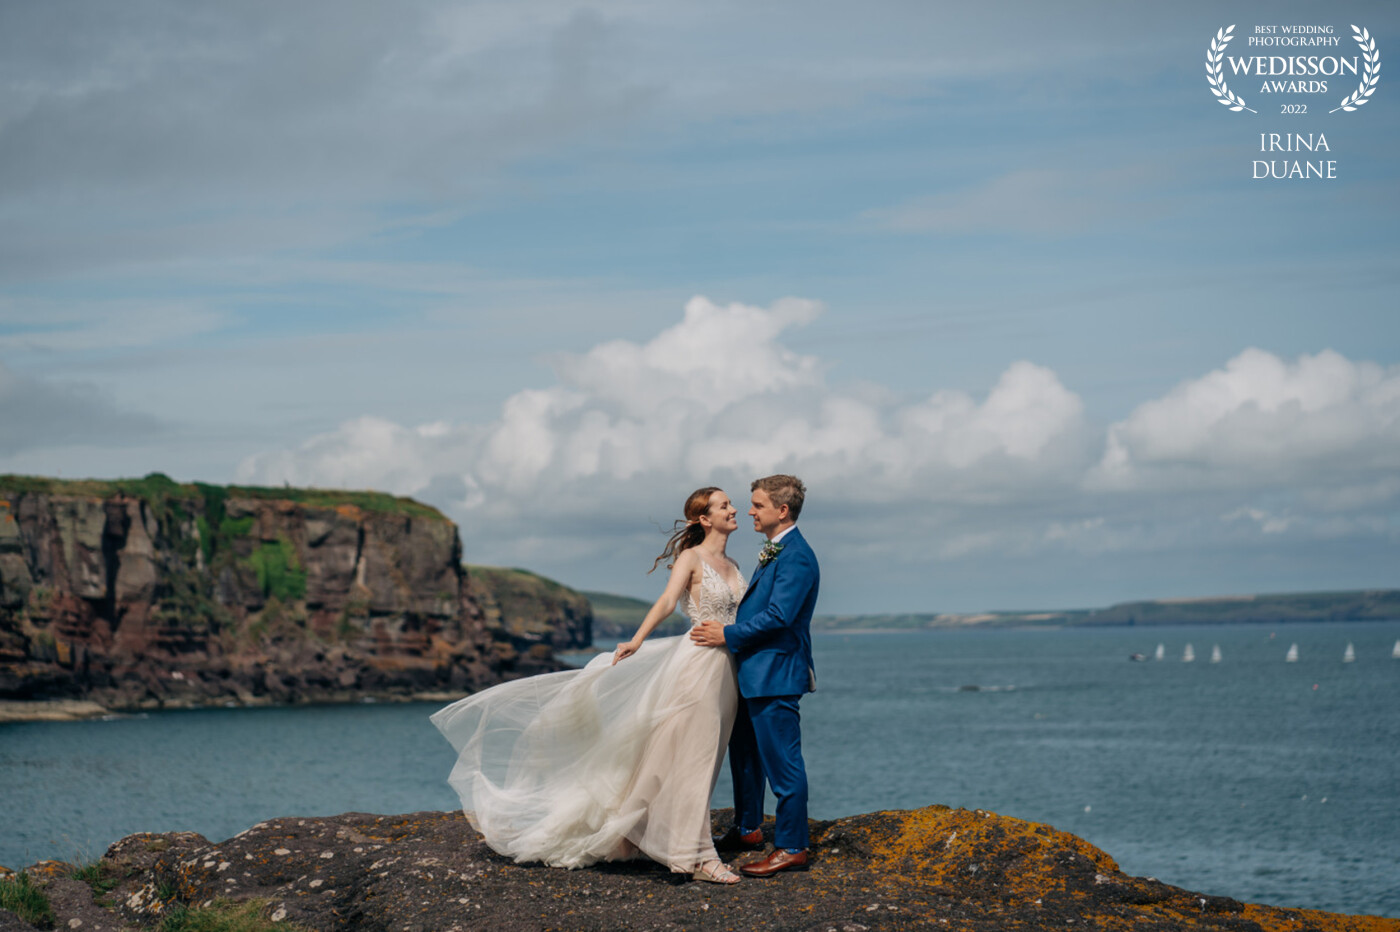 Dunmore East is one of the most beautiful places in Ireland. Clare and Alex, two people clearly in love and they made it easy for me to capture moments like this.